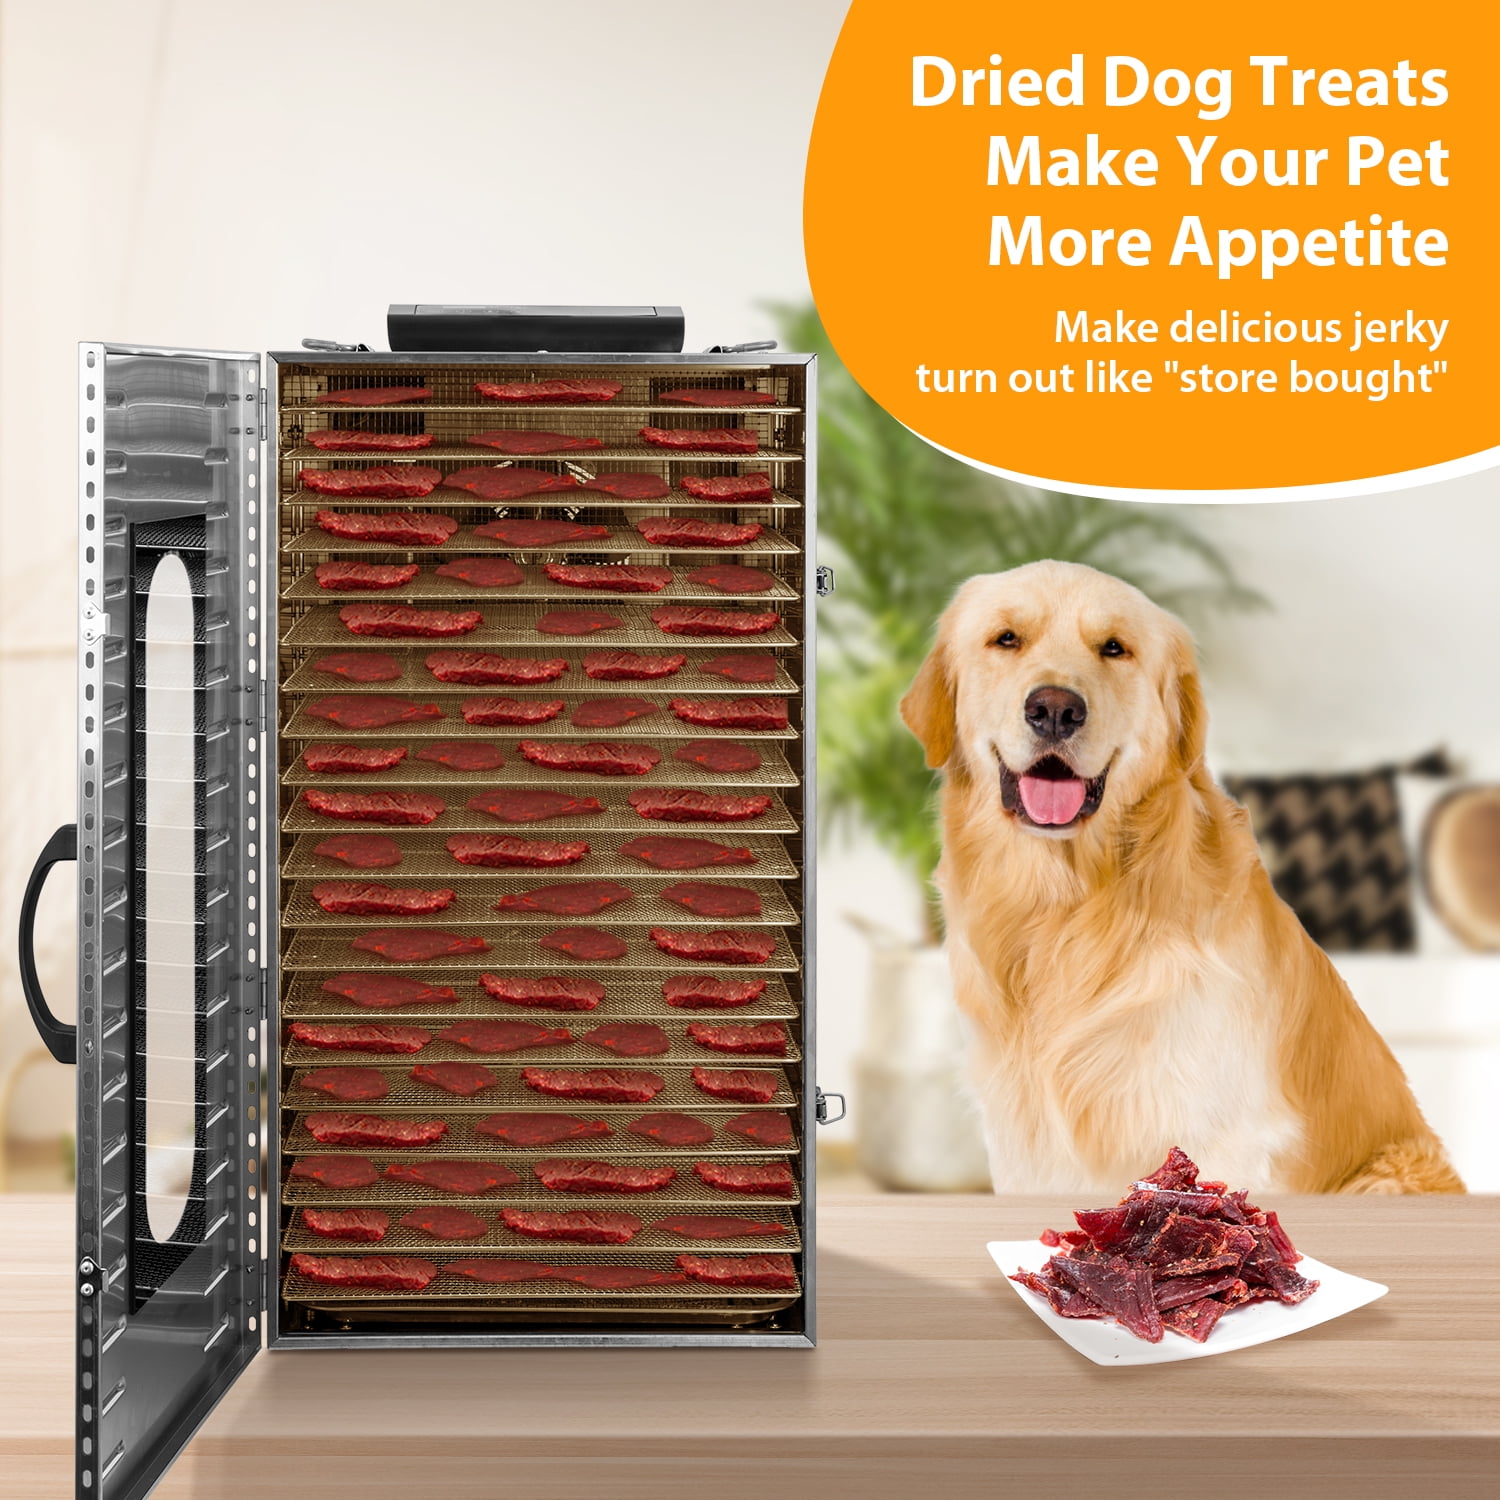 Magic Mill Food Dehydrator Machine | 6 Stainless Steel Trays | Dryer for  Jerky, Dog Treats, Herb, Meat, Beef, Fruit | Keep Warm Function, Digital